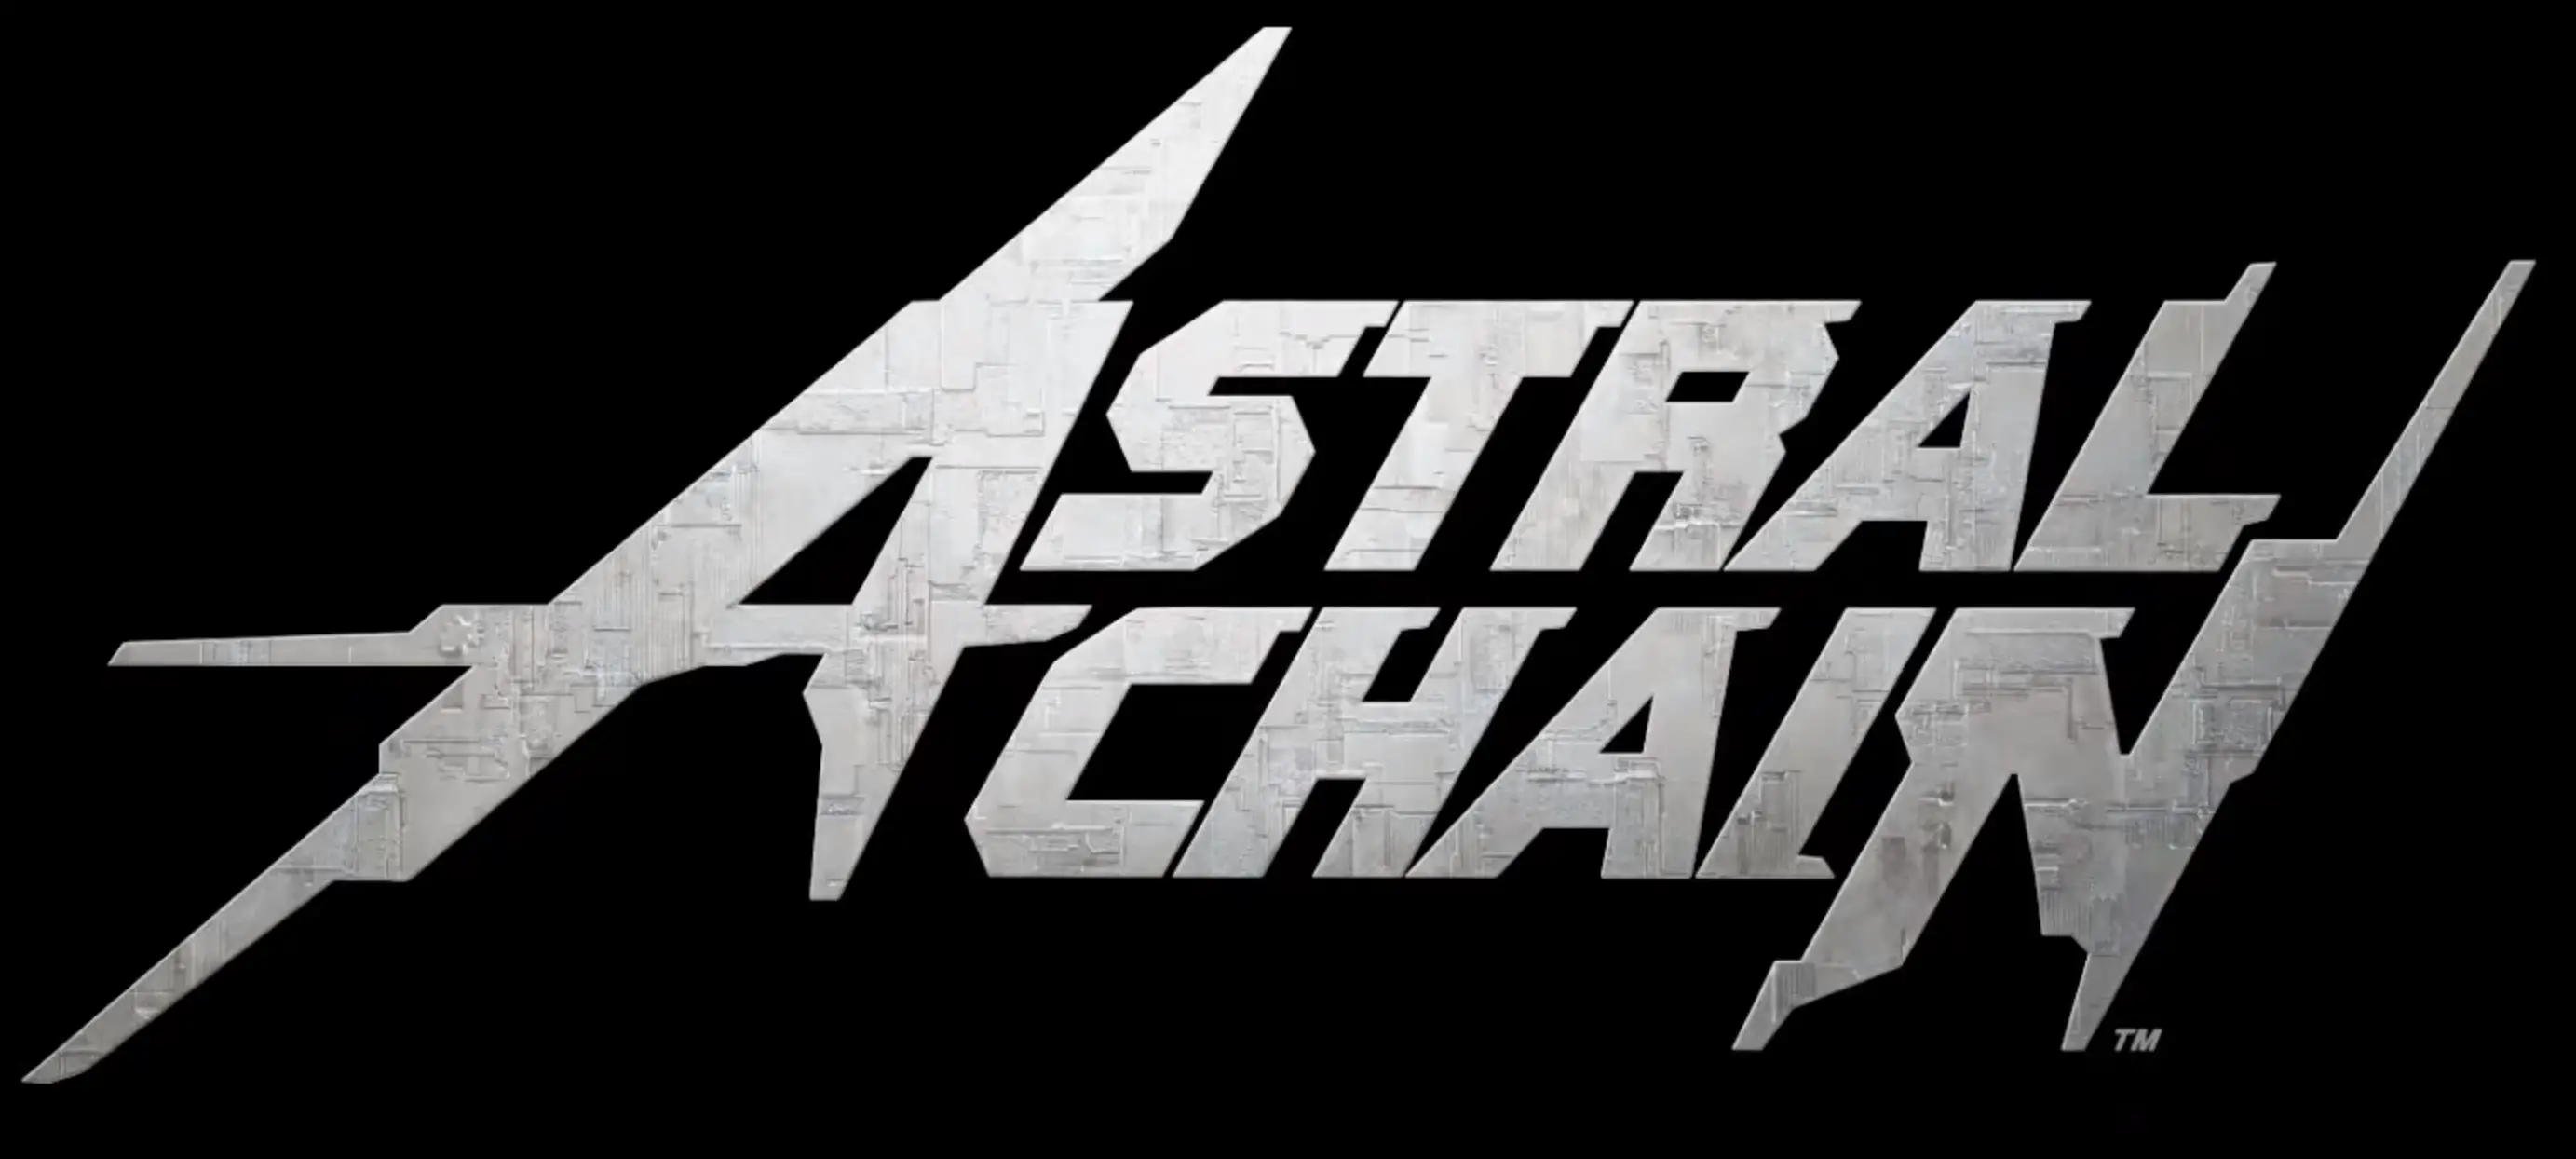 Astral Chain's logo, stylized as jagged gray metal letters on a black background